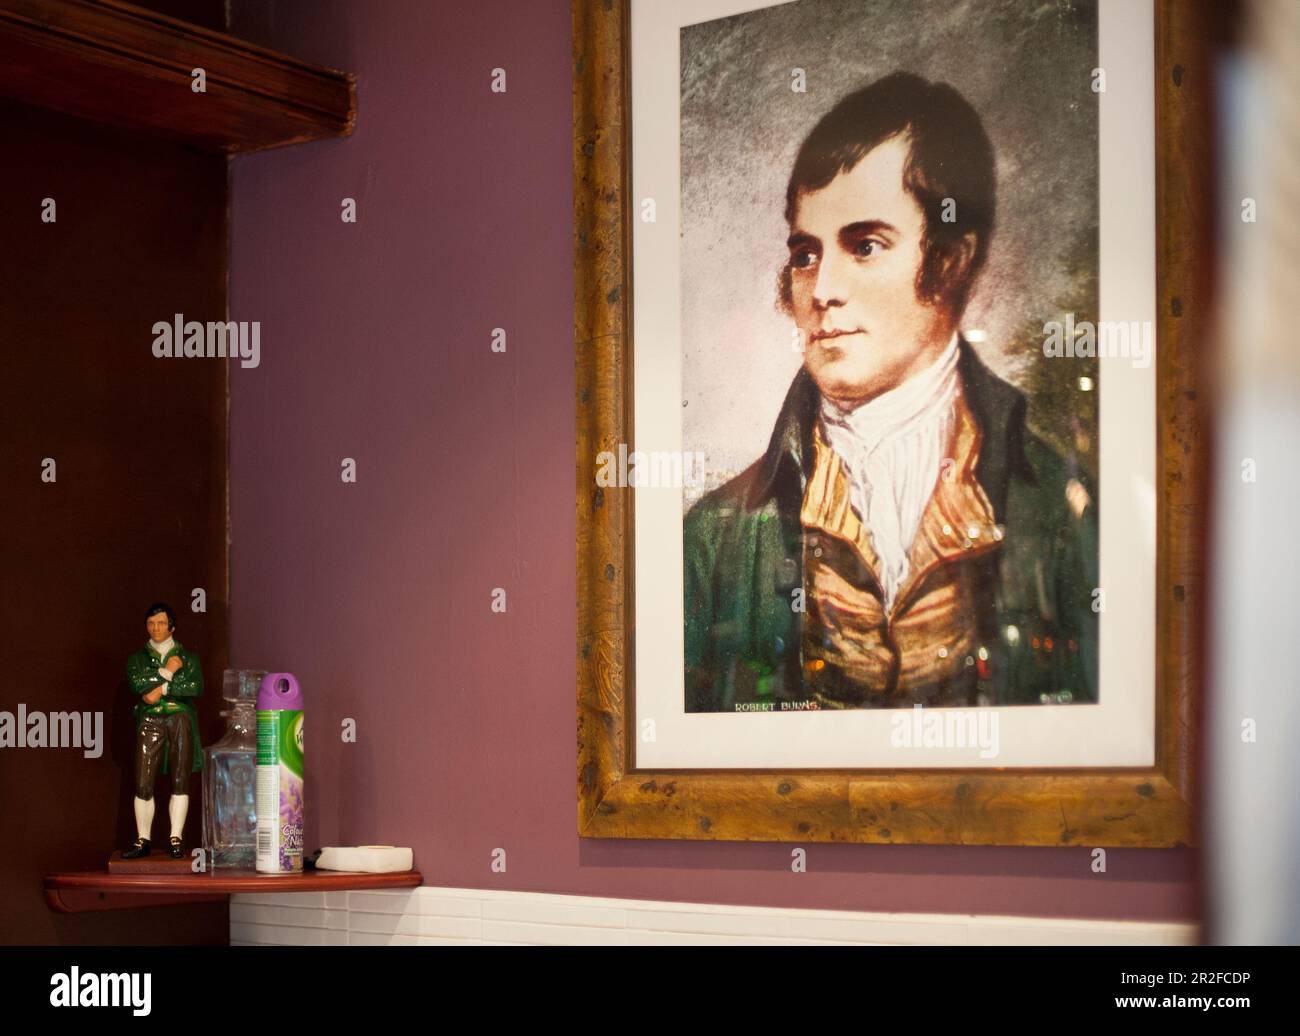 A framed portrait print of Robert Burns beside an ornament of Robert Burns and air freshner in the interior of the club house pavilion at the Mauchlin Stock Photo